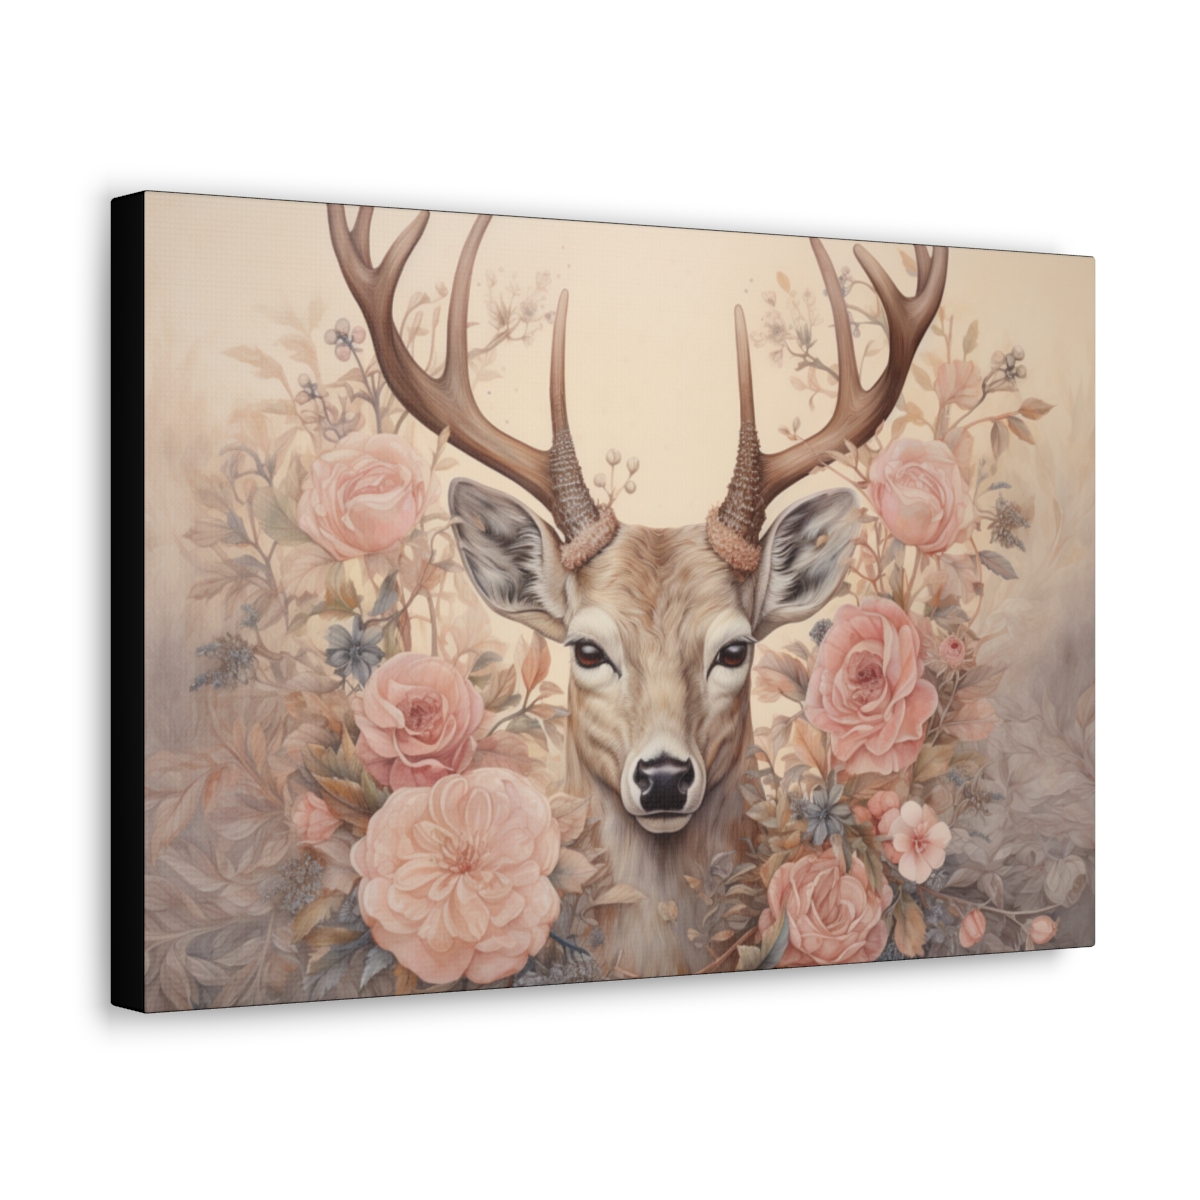 Ethereal Dreamy Nature Art: A Deer To Welcome You